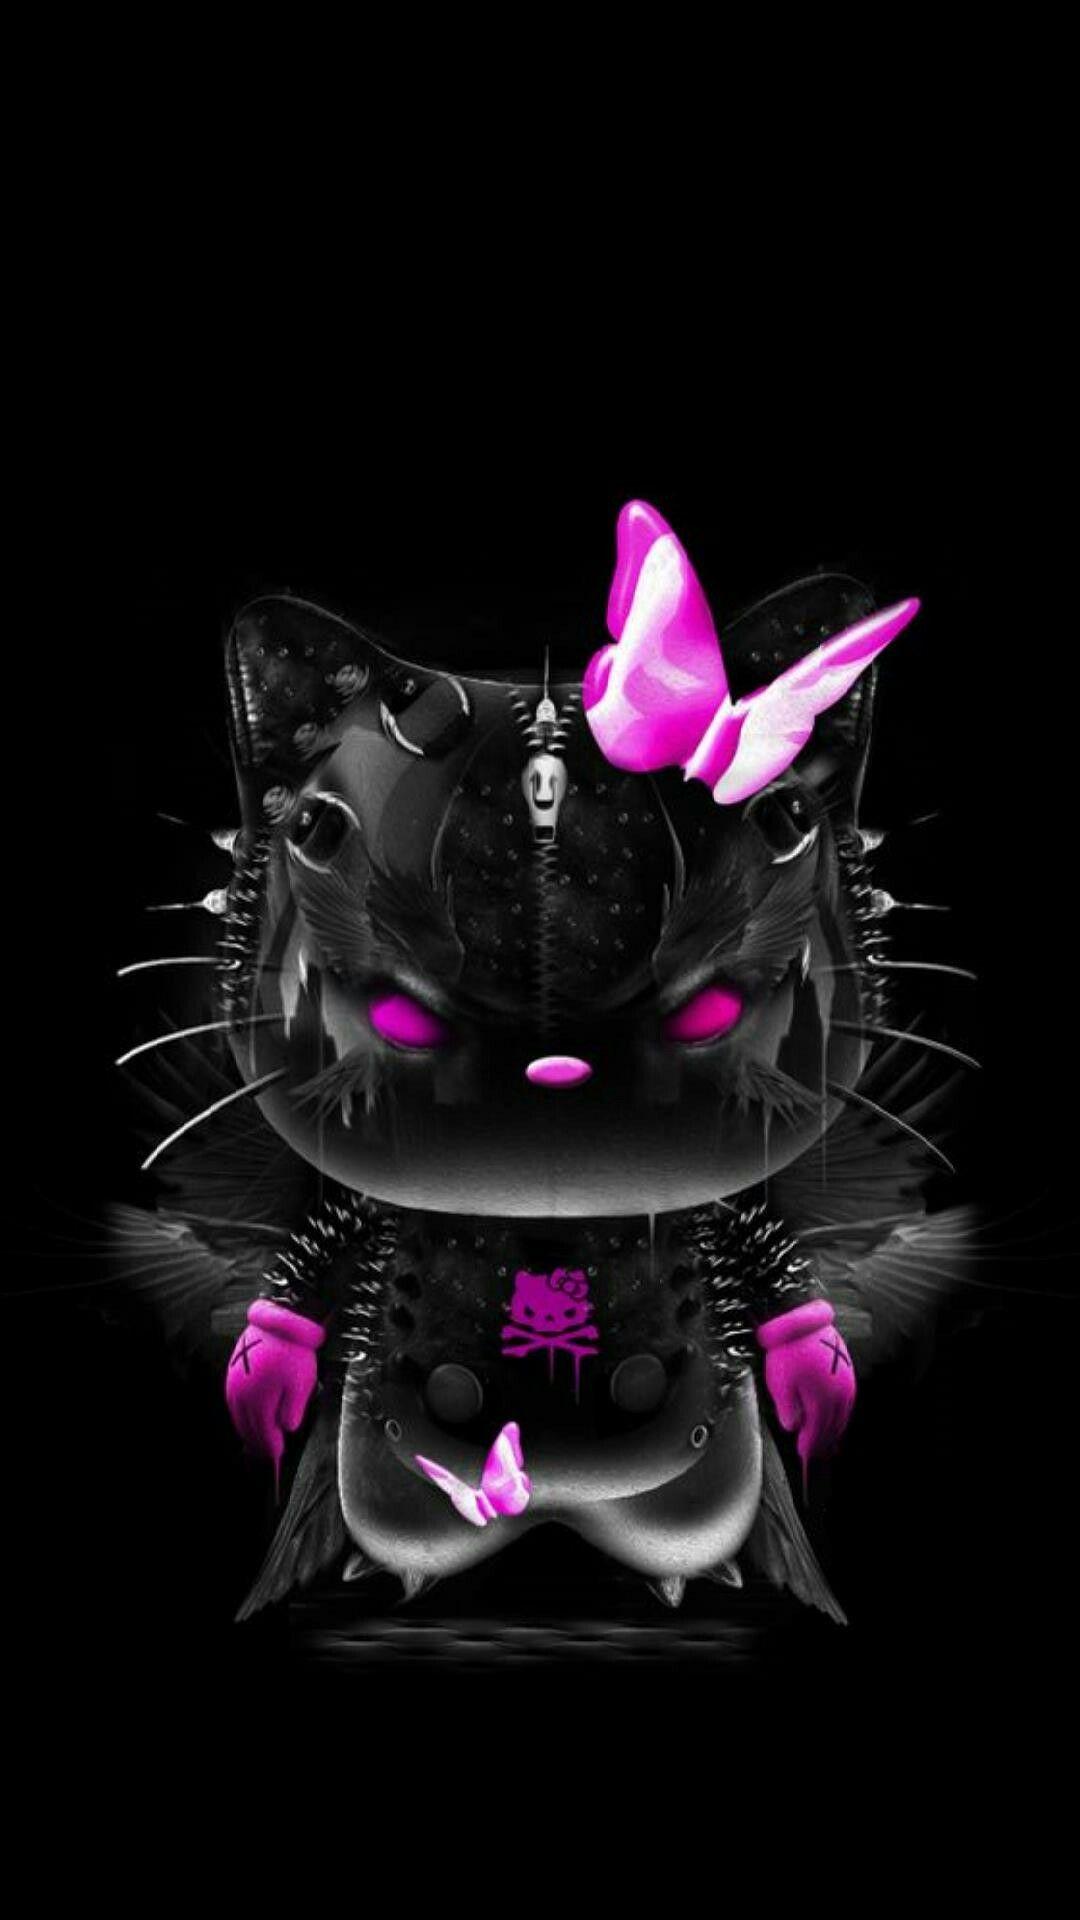 Pink And Black Hello Kitty Wallpapers - Wallpaper Cave